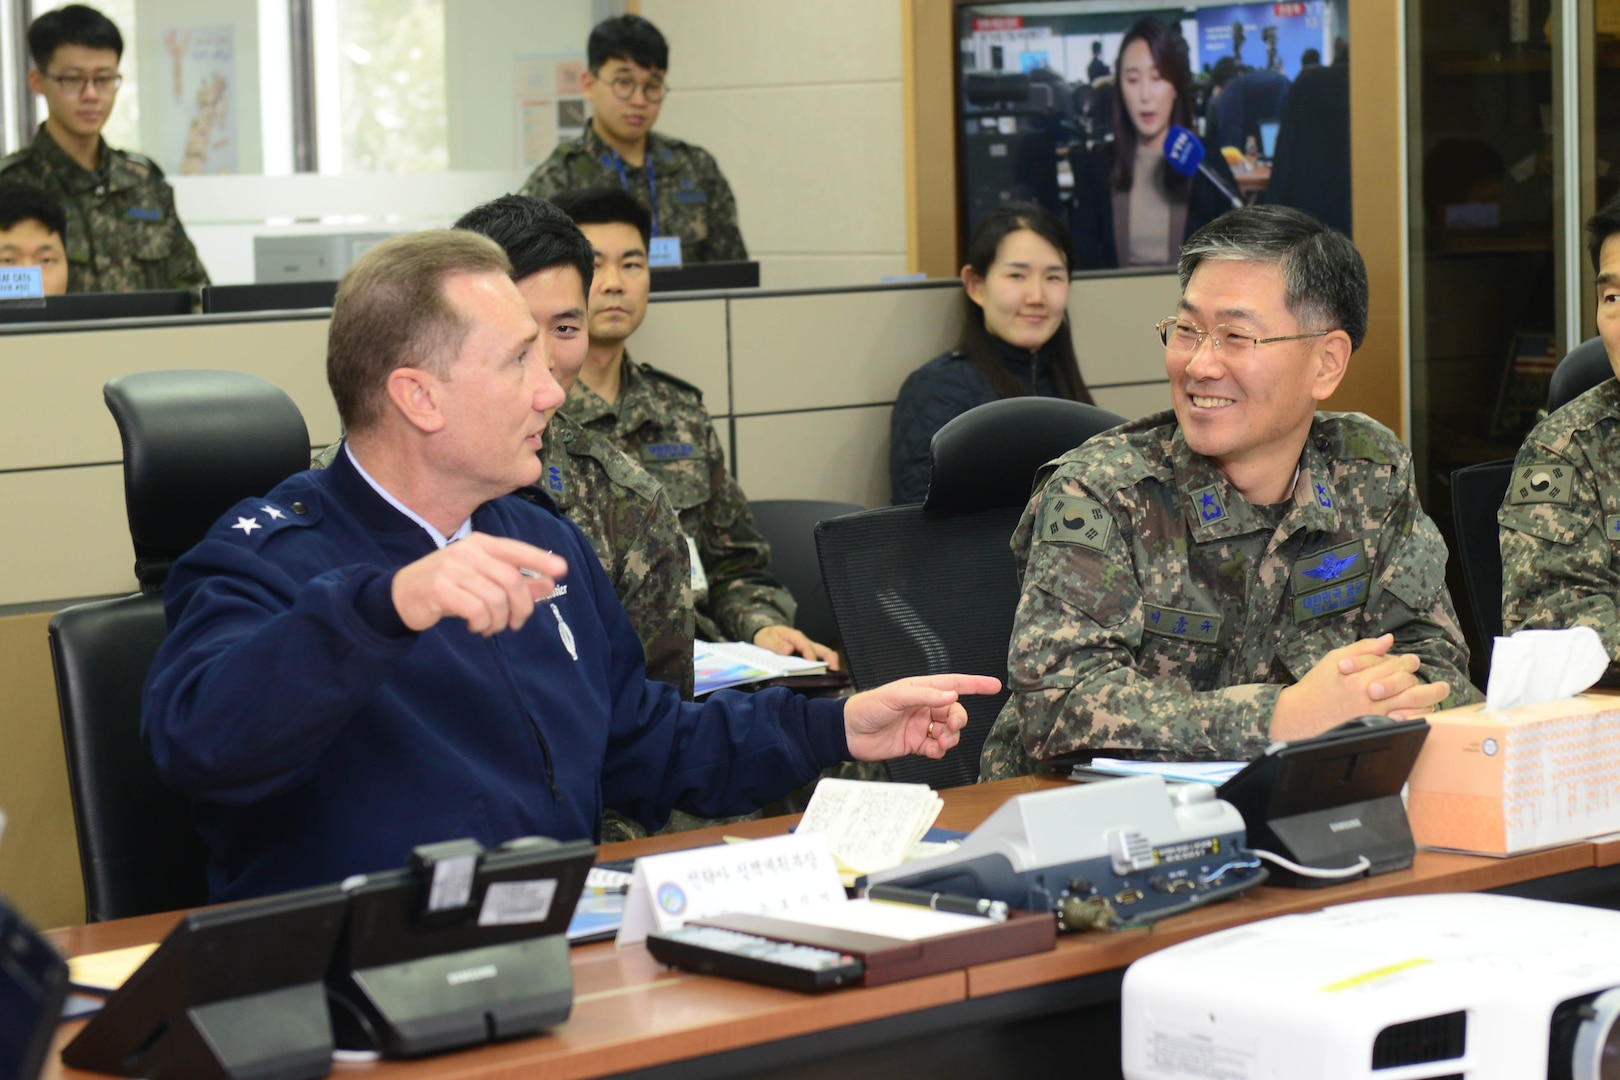 U.S. Air Force Maj. Gen. Clinton Crosier (left), U.S. Strategic Command plans and policy director, speaks to Republic of Korea Air Force (ROKAF) Brig. Gen. Dongkyu Lee, studies and analyses assessments wing commander, during a visit to the Korean Space Operations Center (KSpOC) in Gyeryong-Si, Republic of Korea (ROK), Jan. 20, 2017. Crosier visited the KSpOC and the ROKAF Headquarters to meet with ROKAF leaders and discuss U.S.-ROK military collaboration in space. One of nine DoD unified combatant commands, USSTRATCOM has global strategic missions assigned through the Unified Command Plan that include strategic deterrence; space operations; cyberspace operations; joint electronic warfare; global strike; missile defense; intelligence, surveillance and reconnaissance; and analysis and targeting. 